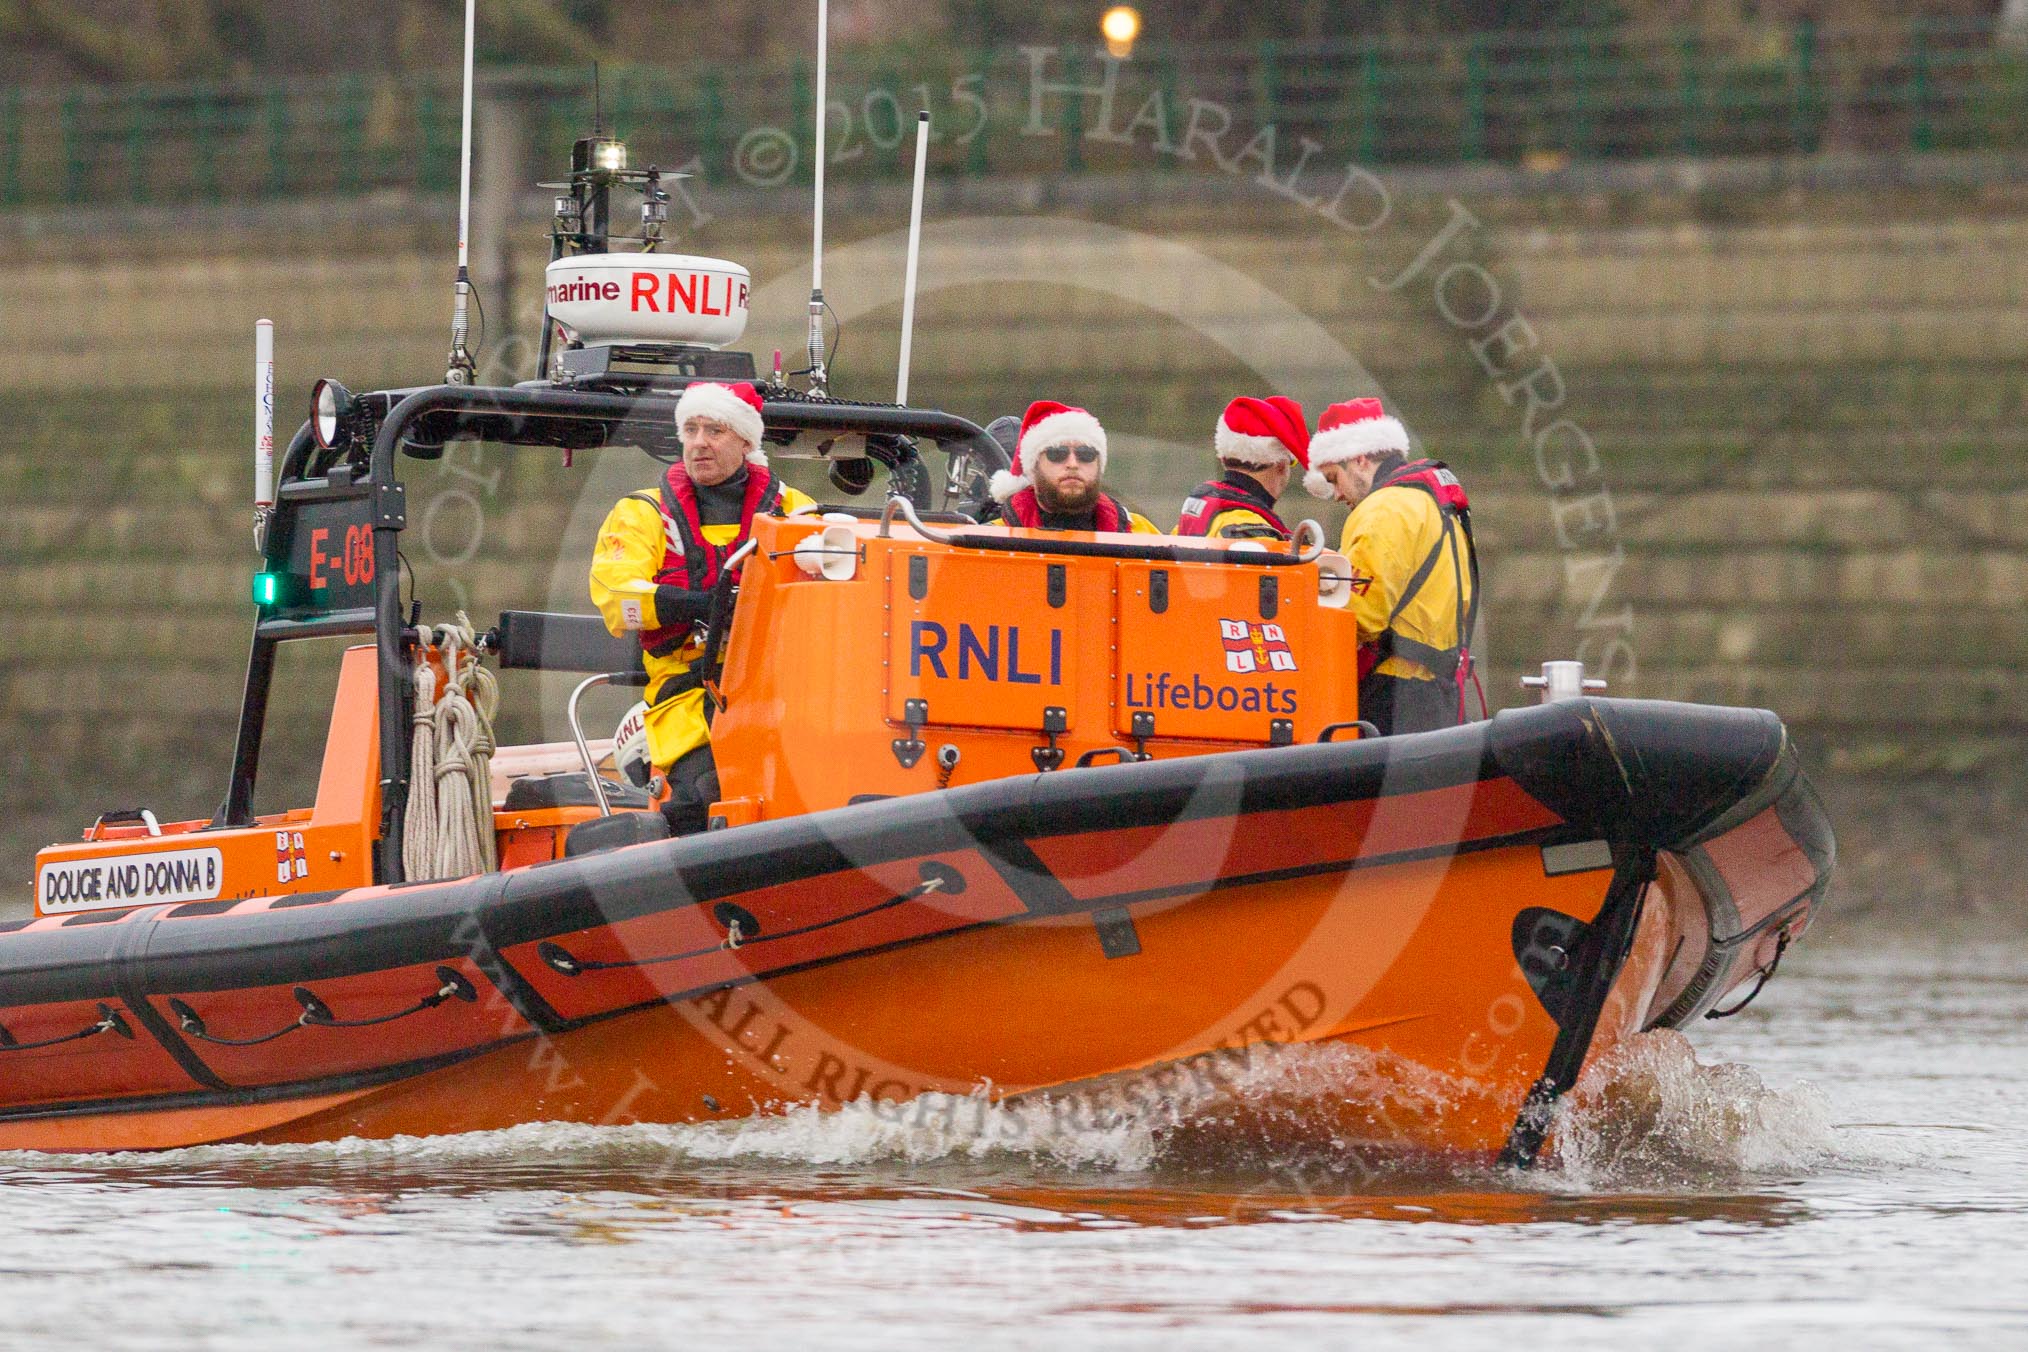 The Boat Race season 2016 - Women's Boat Race Trial Eights (CUWBC, Cambridge): RNLI E-Class lifeboat E08 with a crew in the Christmas spirit! See http://j.mp/rnli-e-class for a virtual of this high-tech boat..
River Thames between Putney Bridge and Mortlake,
London SW15,

United Kingdom,
on 10 December 2015 at 10:46, image #30